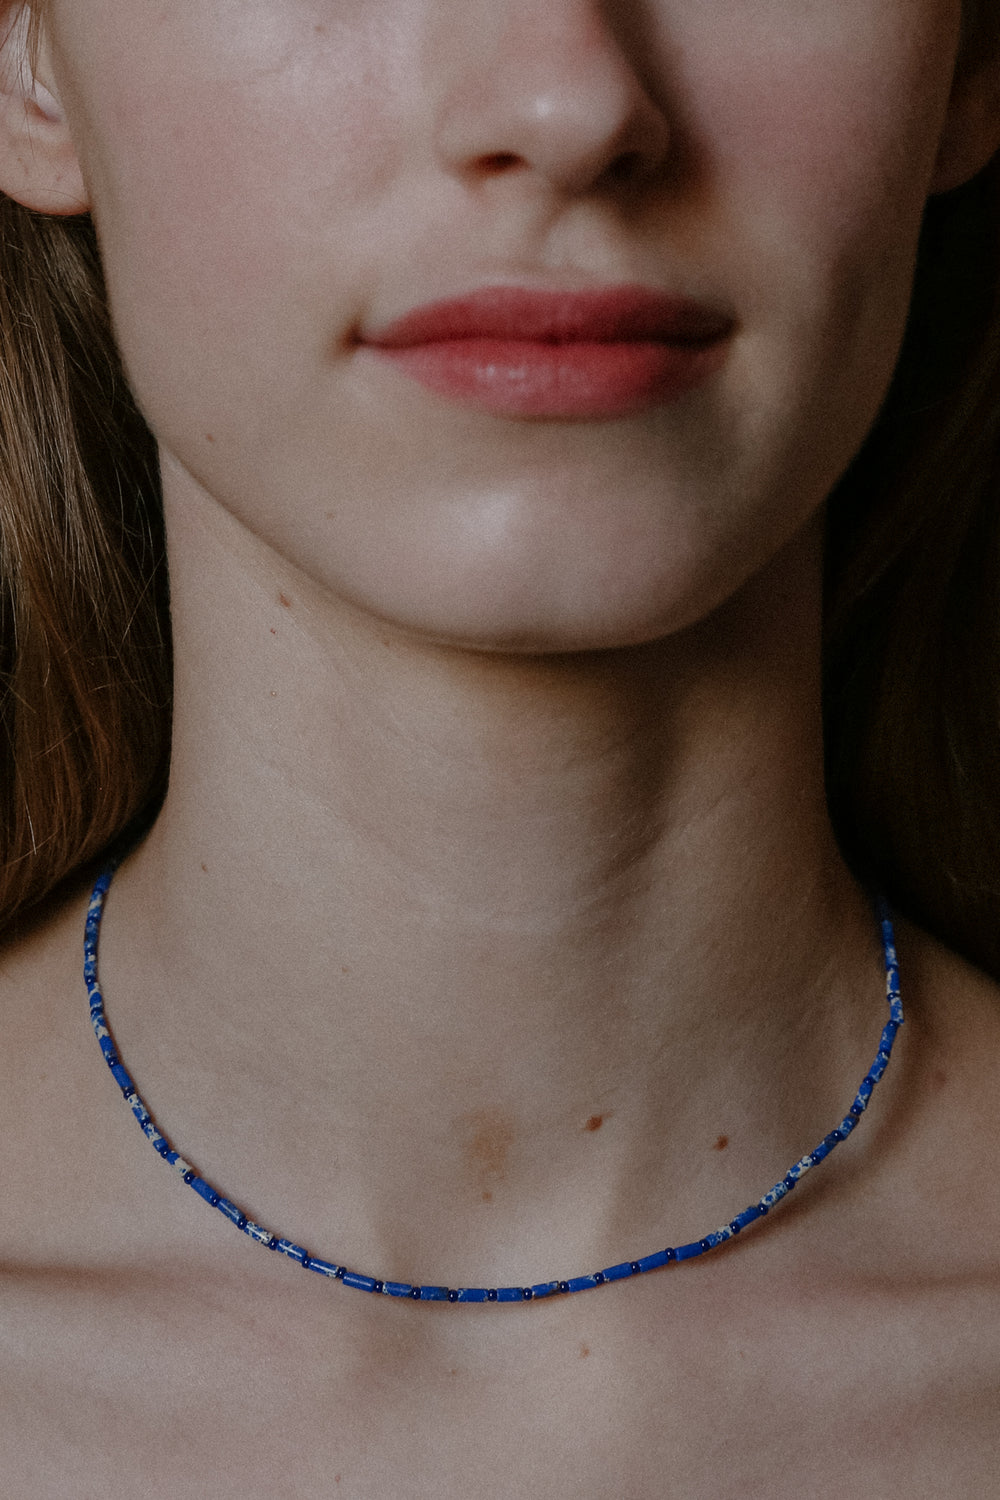 FRANCIS NECKLACE IN BLUE